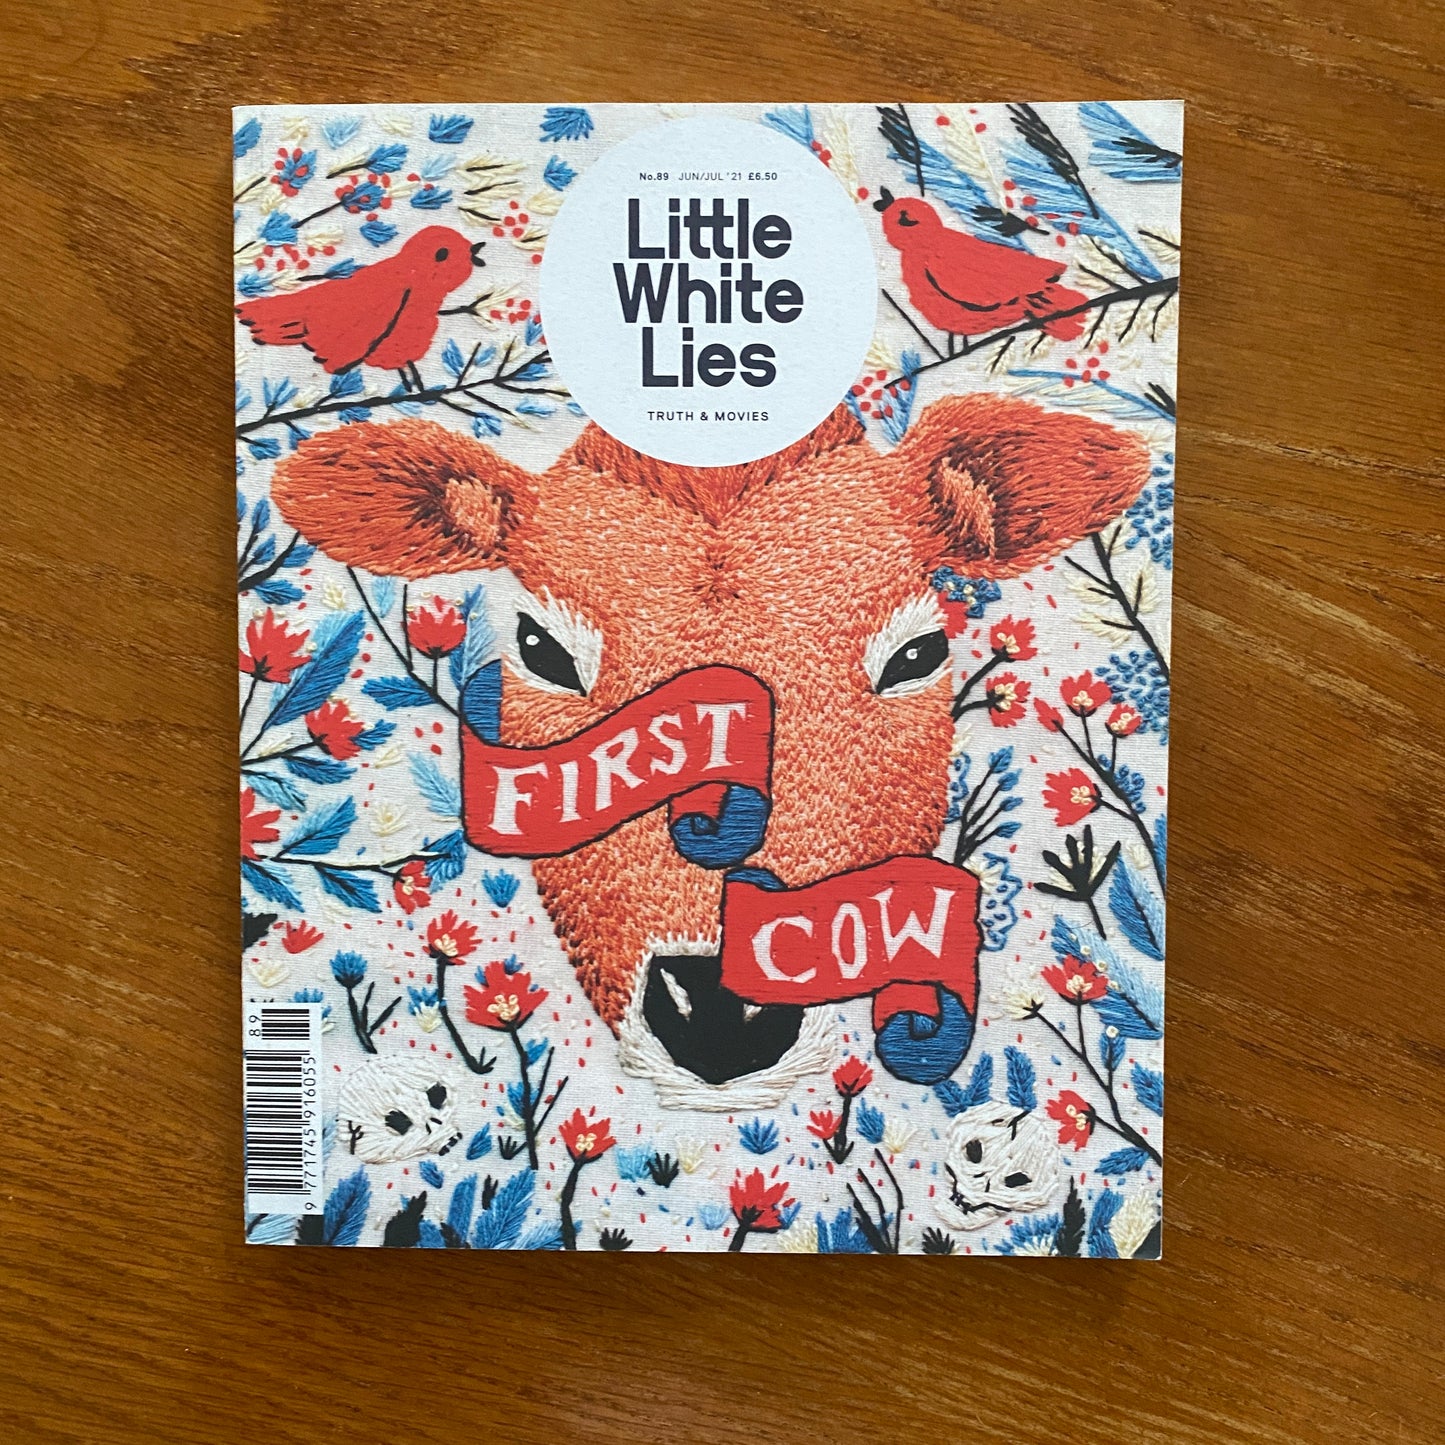 Issue 89 - First Cow